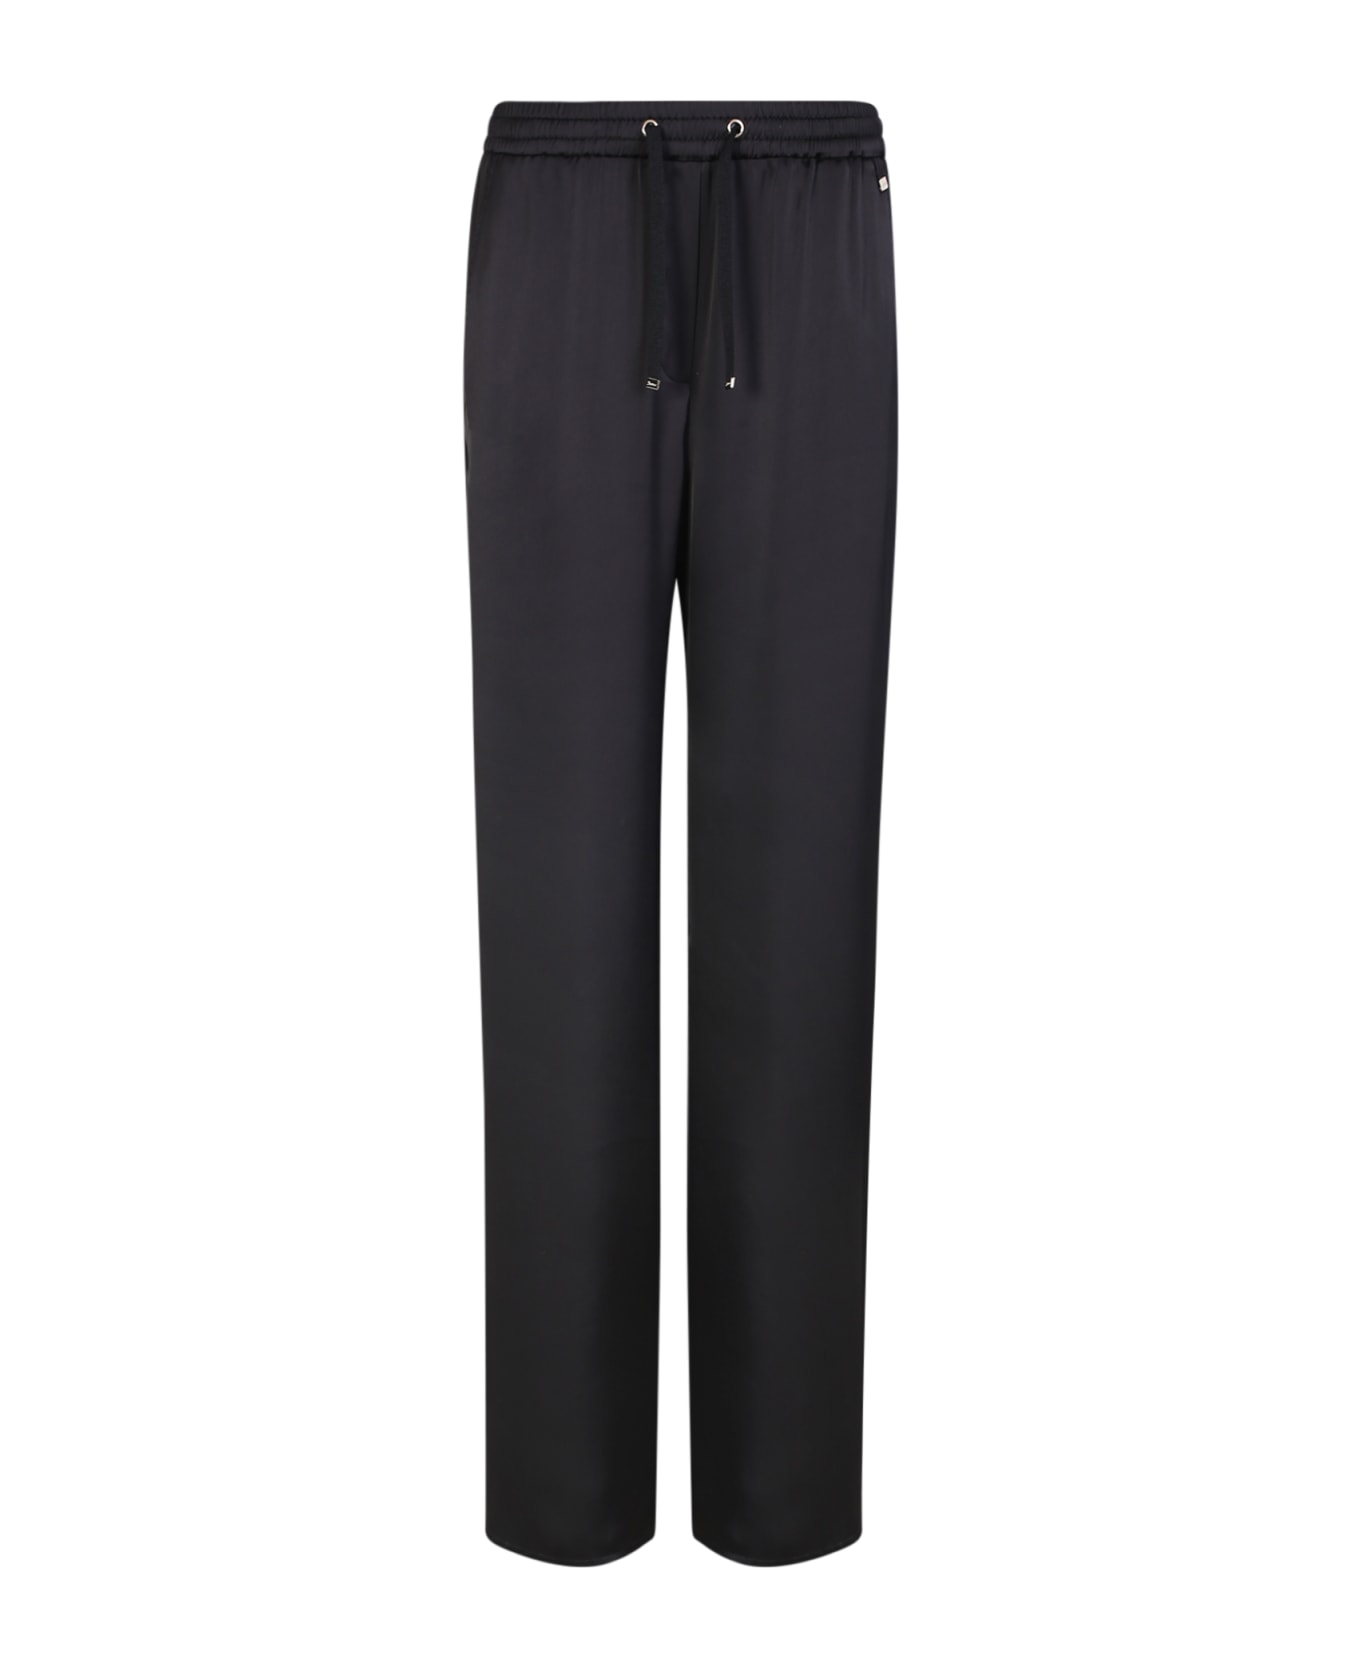 Herno Casual Satin Trousers - Black ボトムス